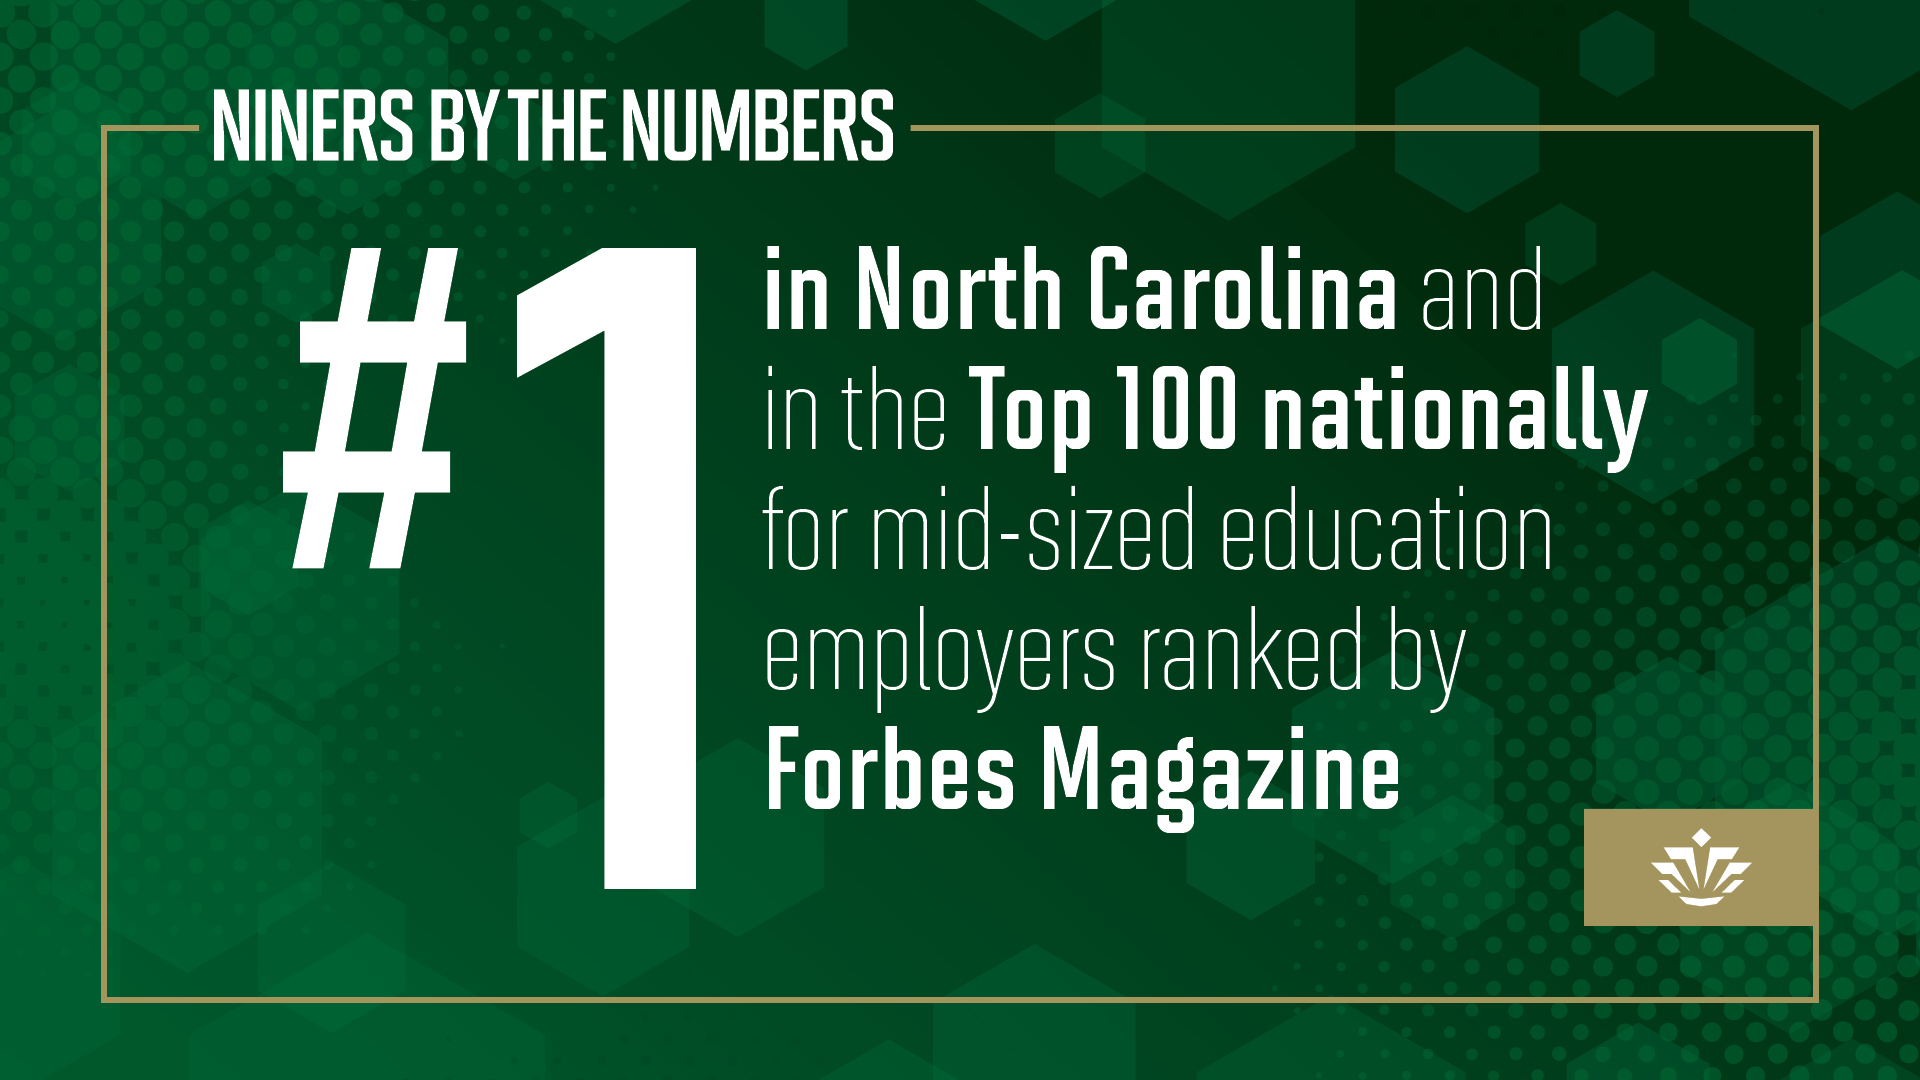 Niners by the Numbers: #1 in North Carolina in the Top 100 nationally for mid-sized education employers ranked by Forbes Magazine.